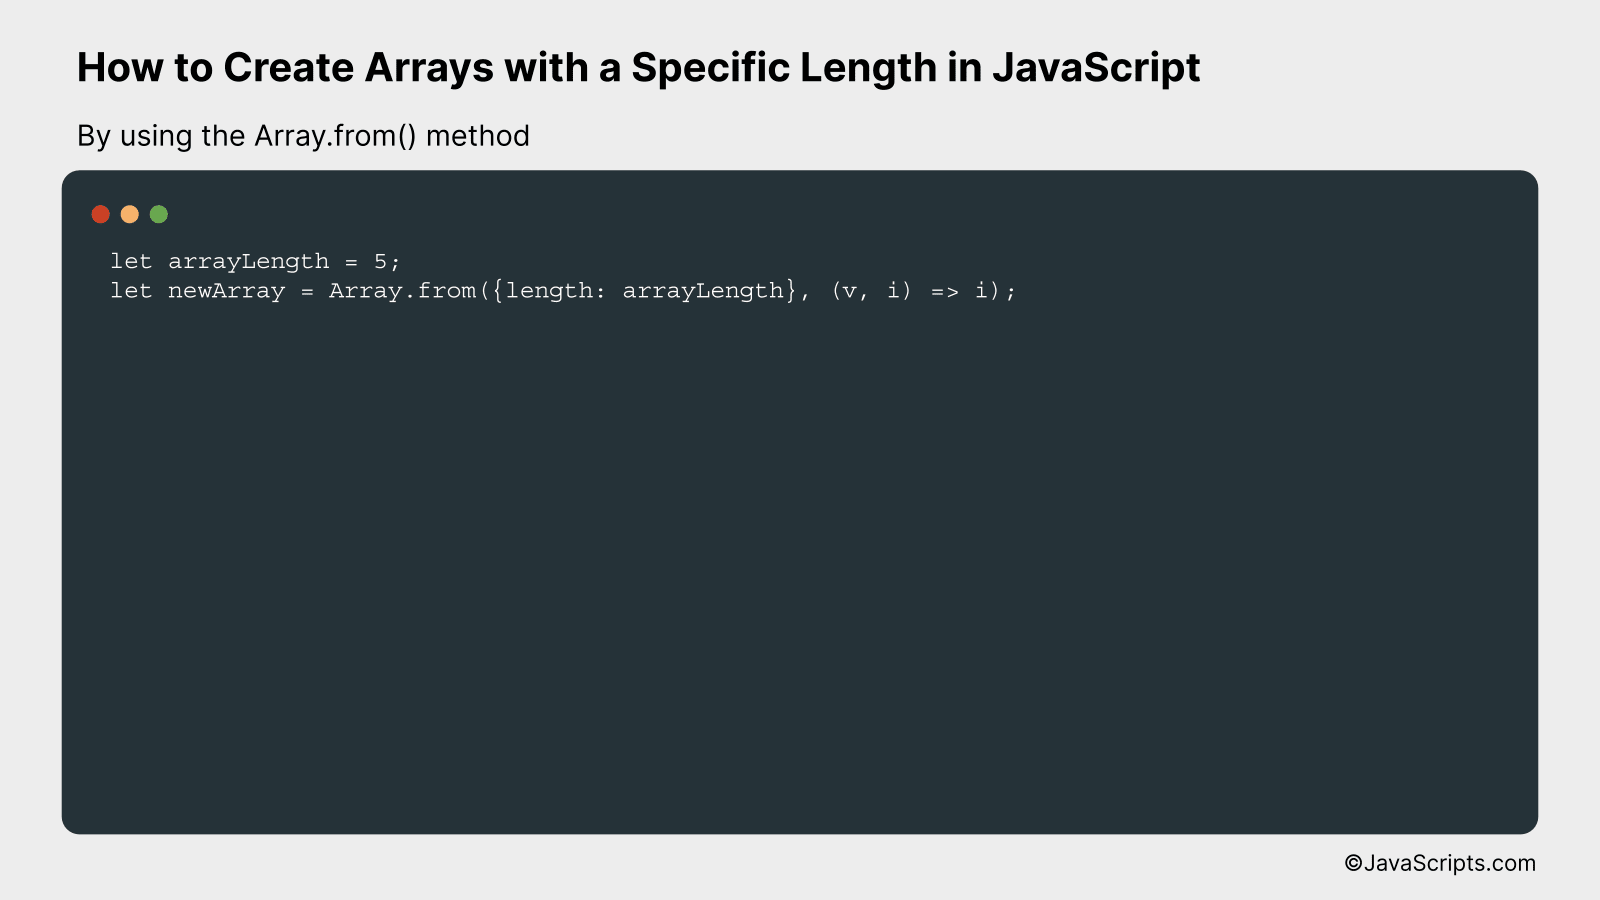 By using the Array.from() method